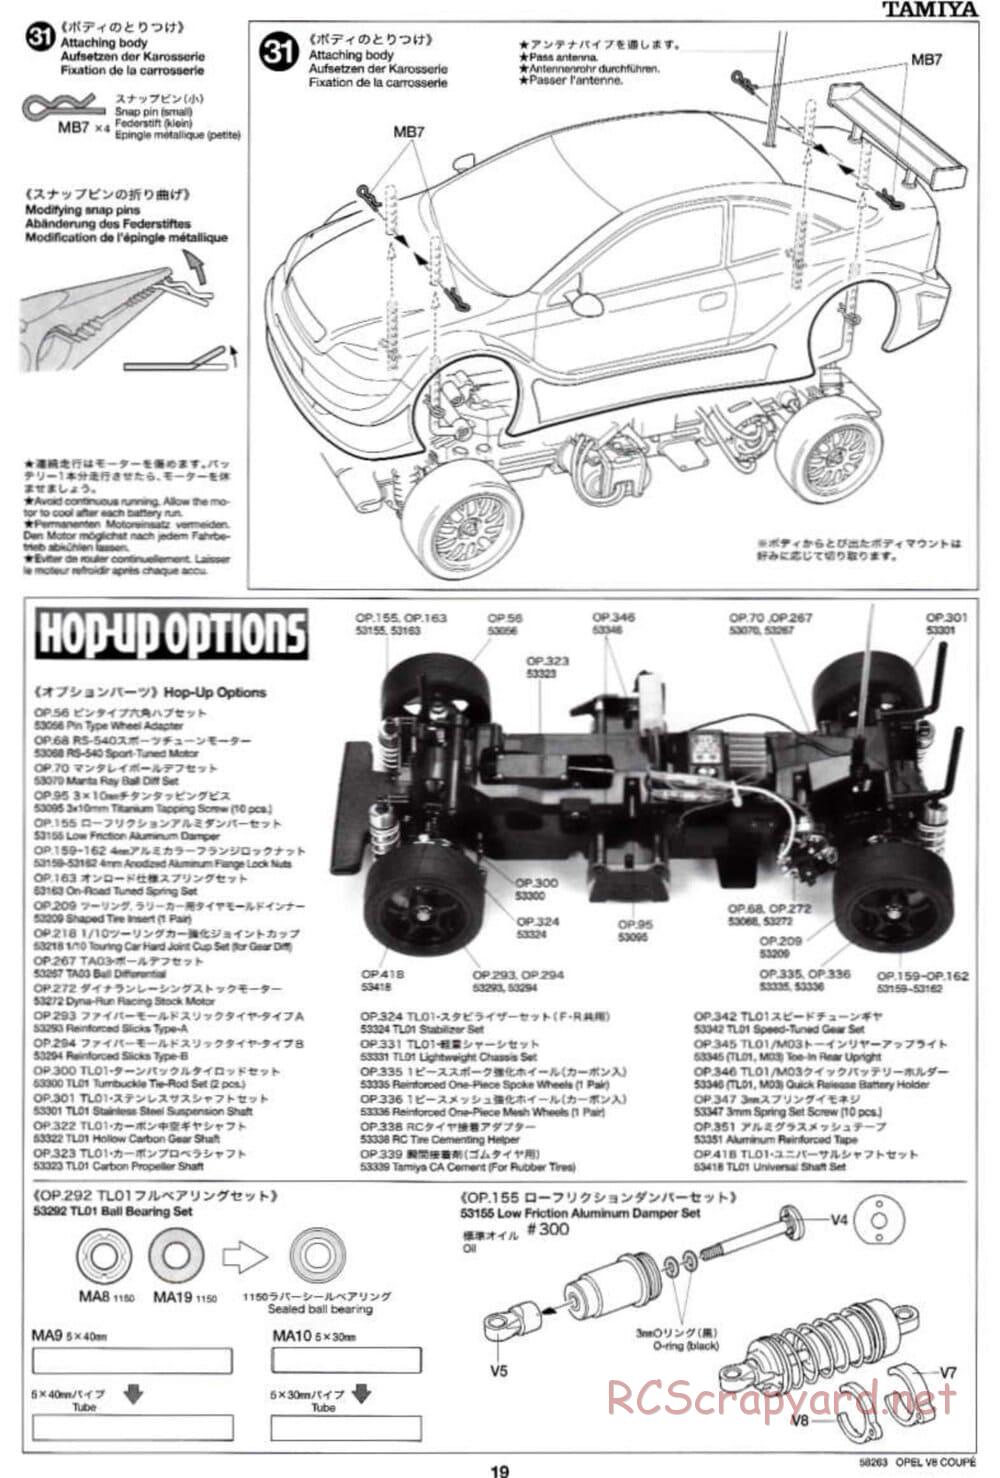 Tamiya - Opel V8 Coupe - TL-01 Chassis - Manual - Page 19